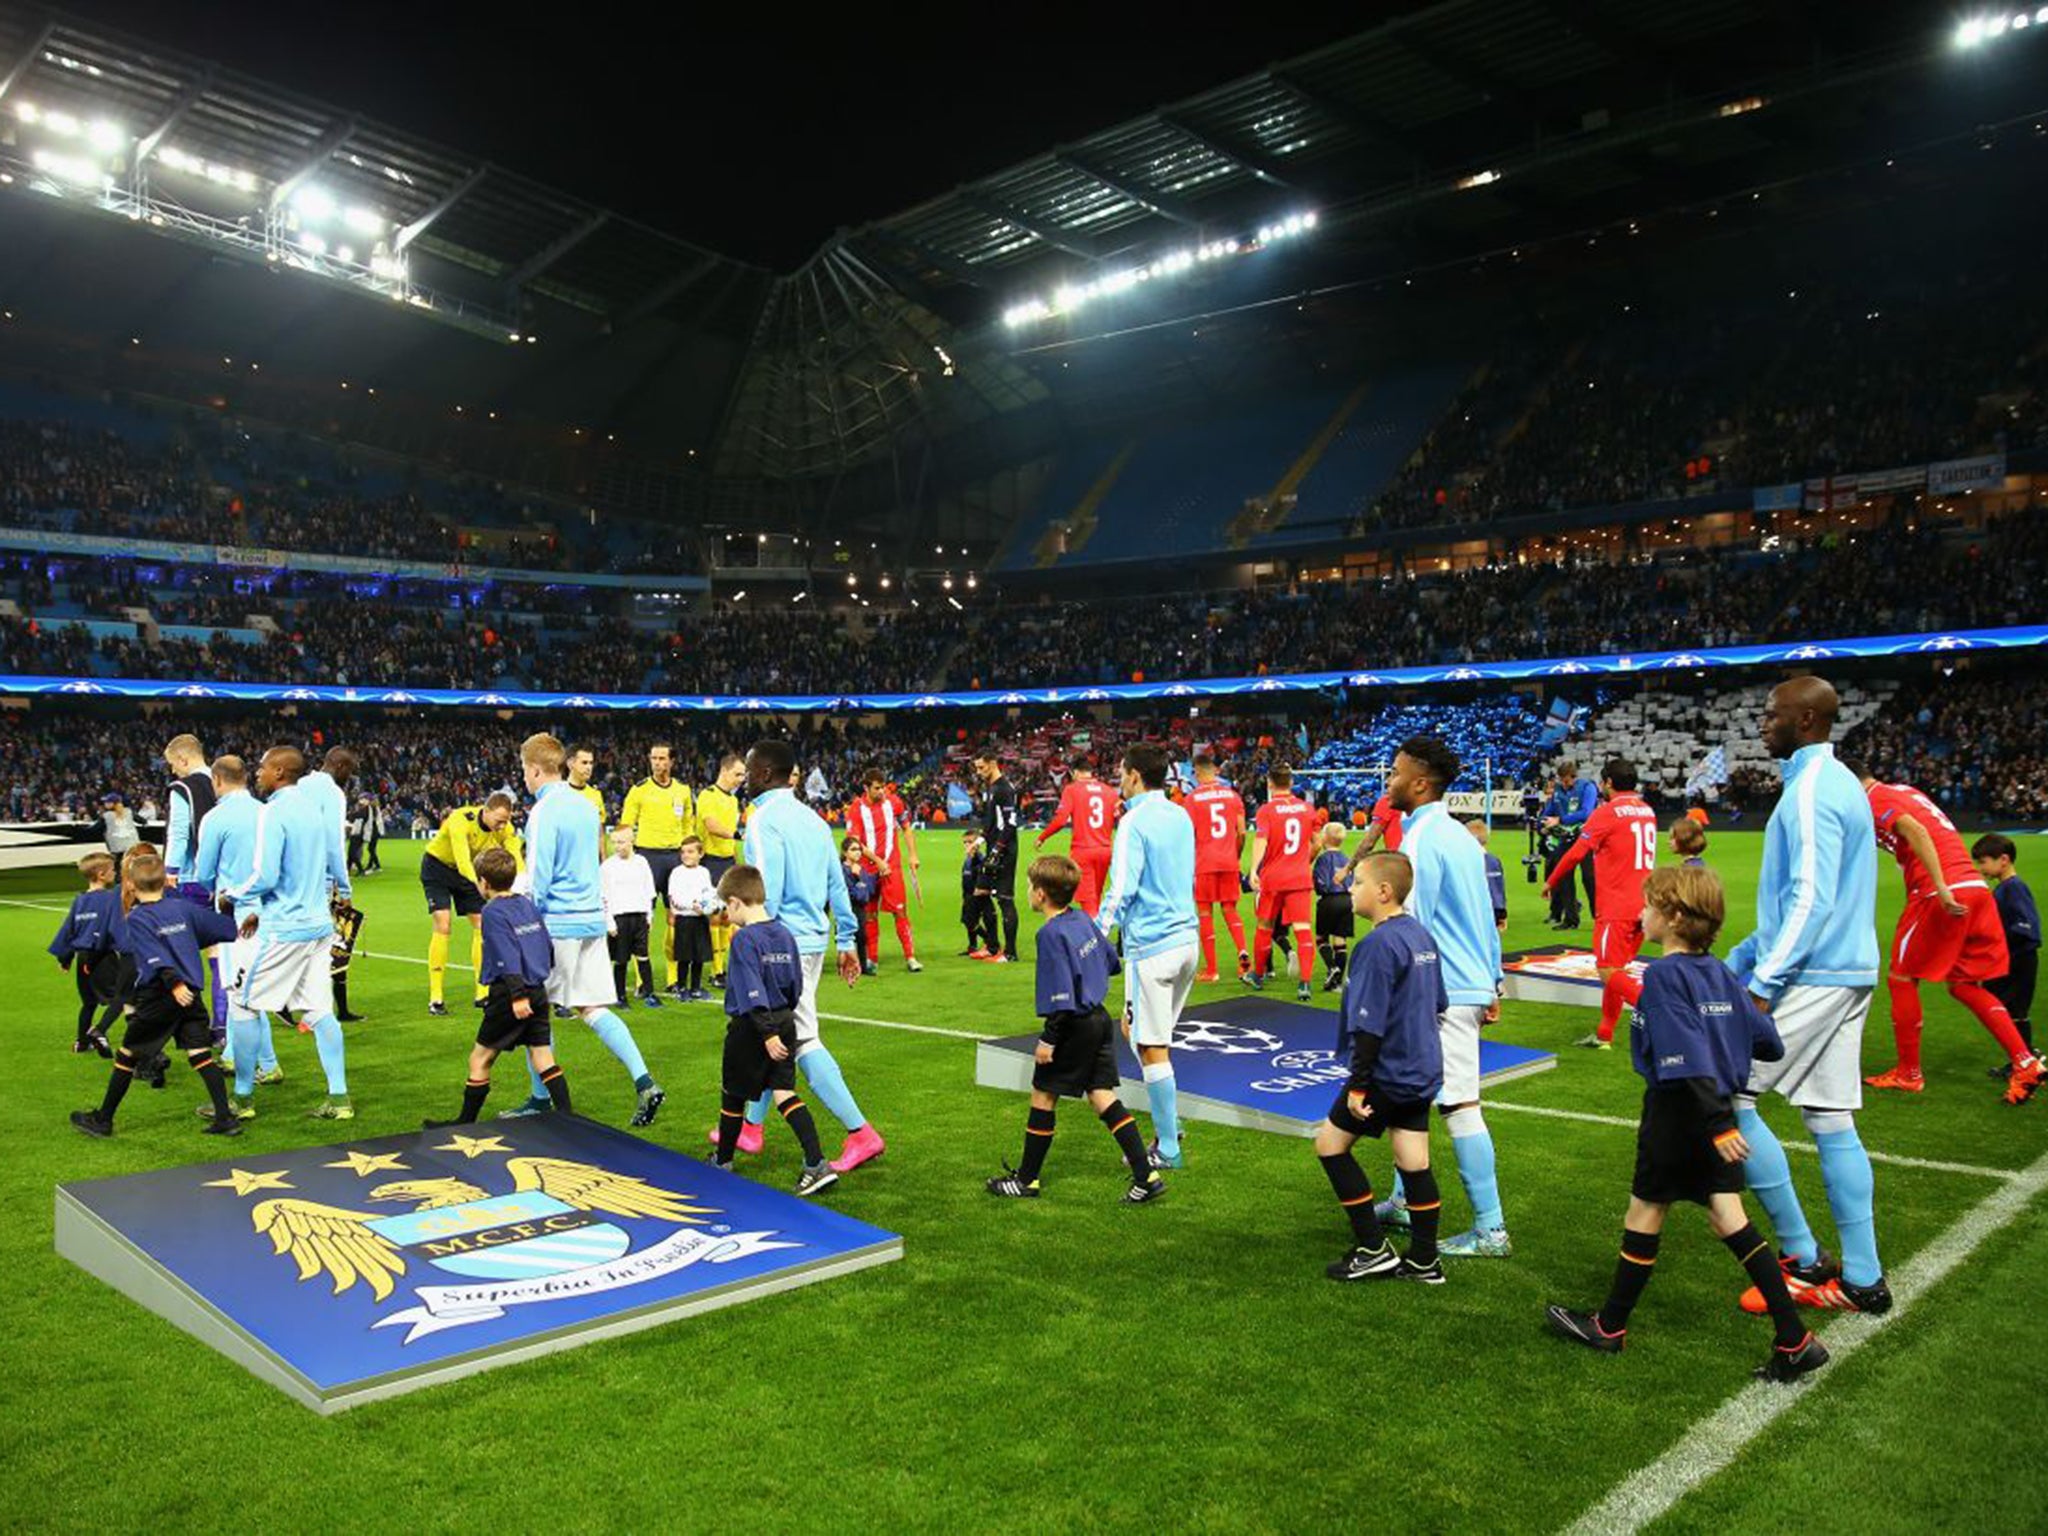 The teams walk out before the Champions League game between Manchester City and Sevilla on Wednesday